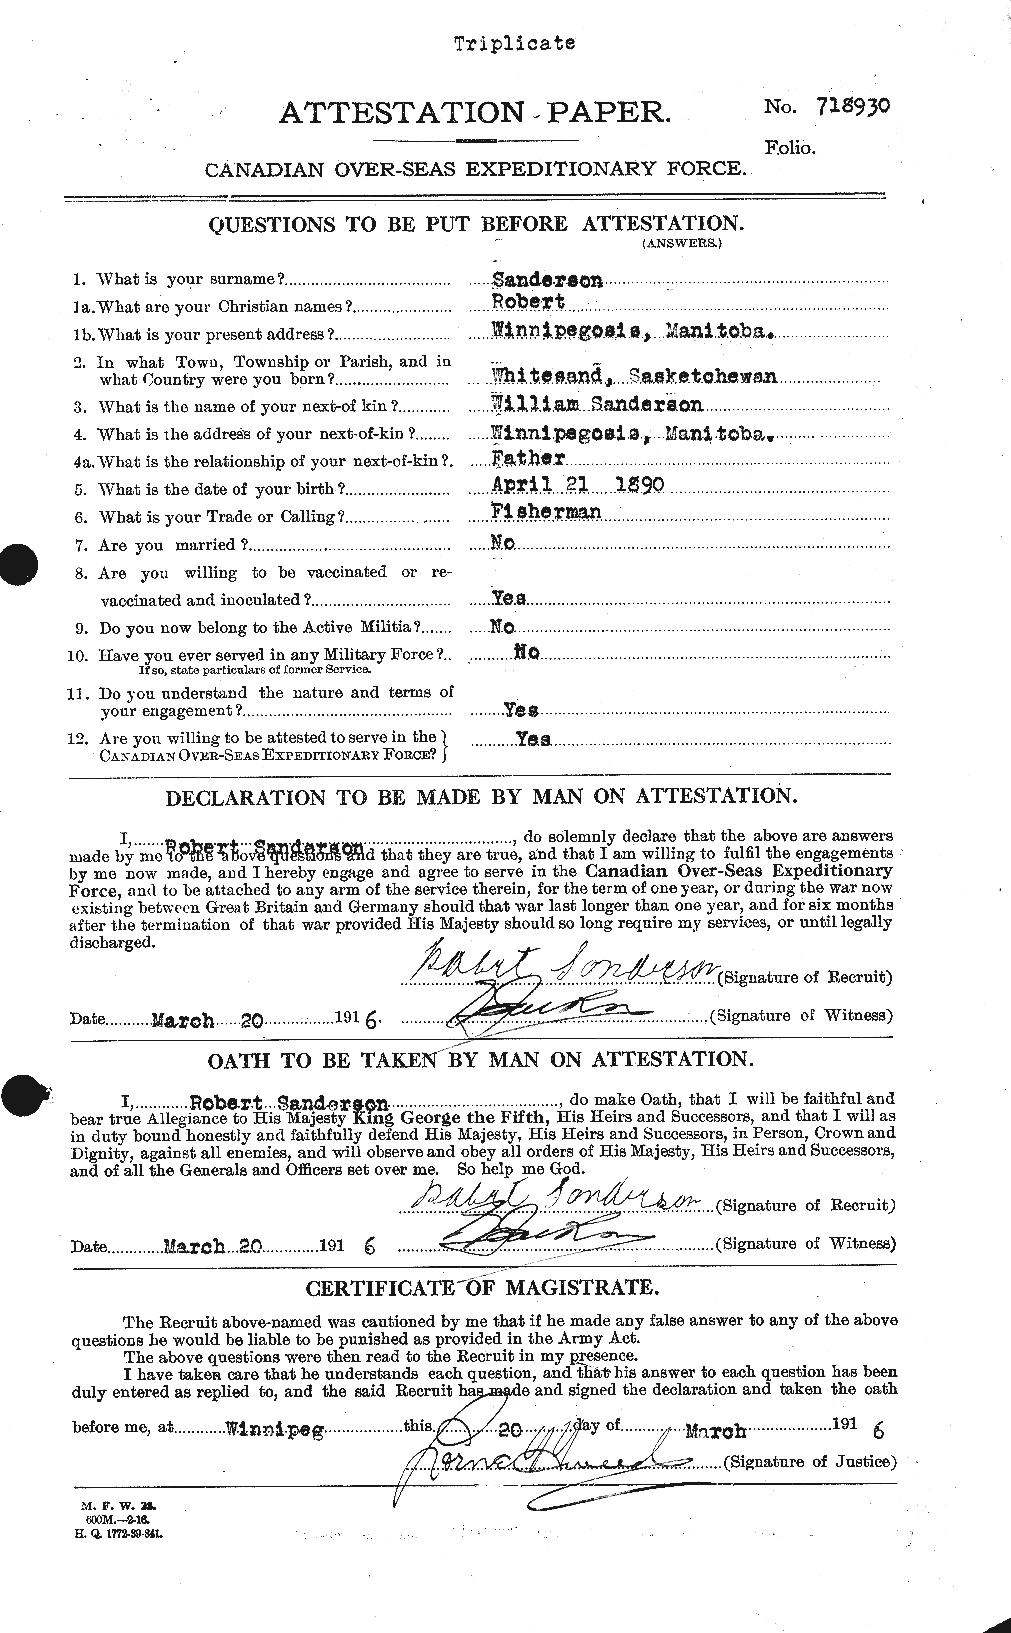 Personnel Records of the First World War - CEF 079812a